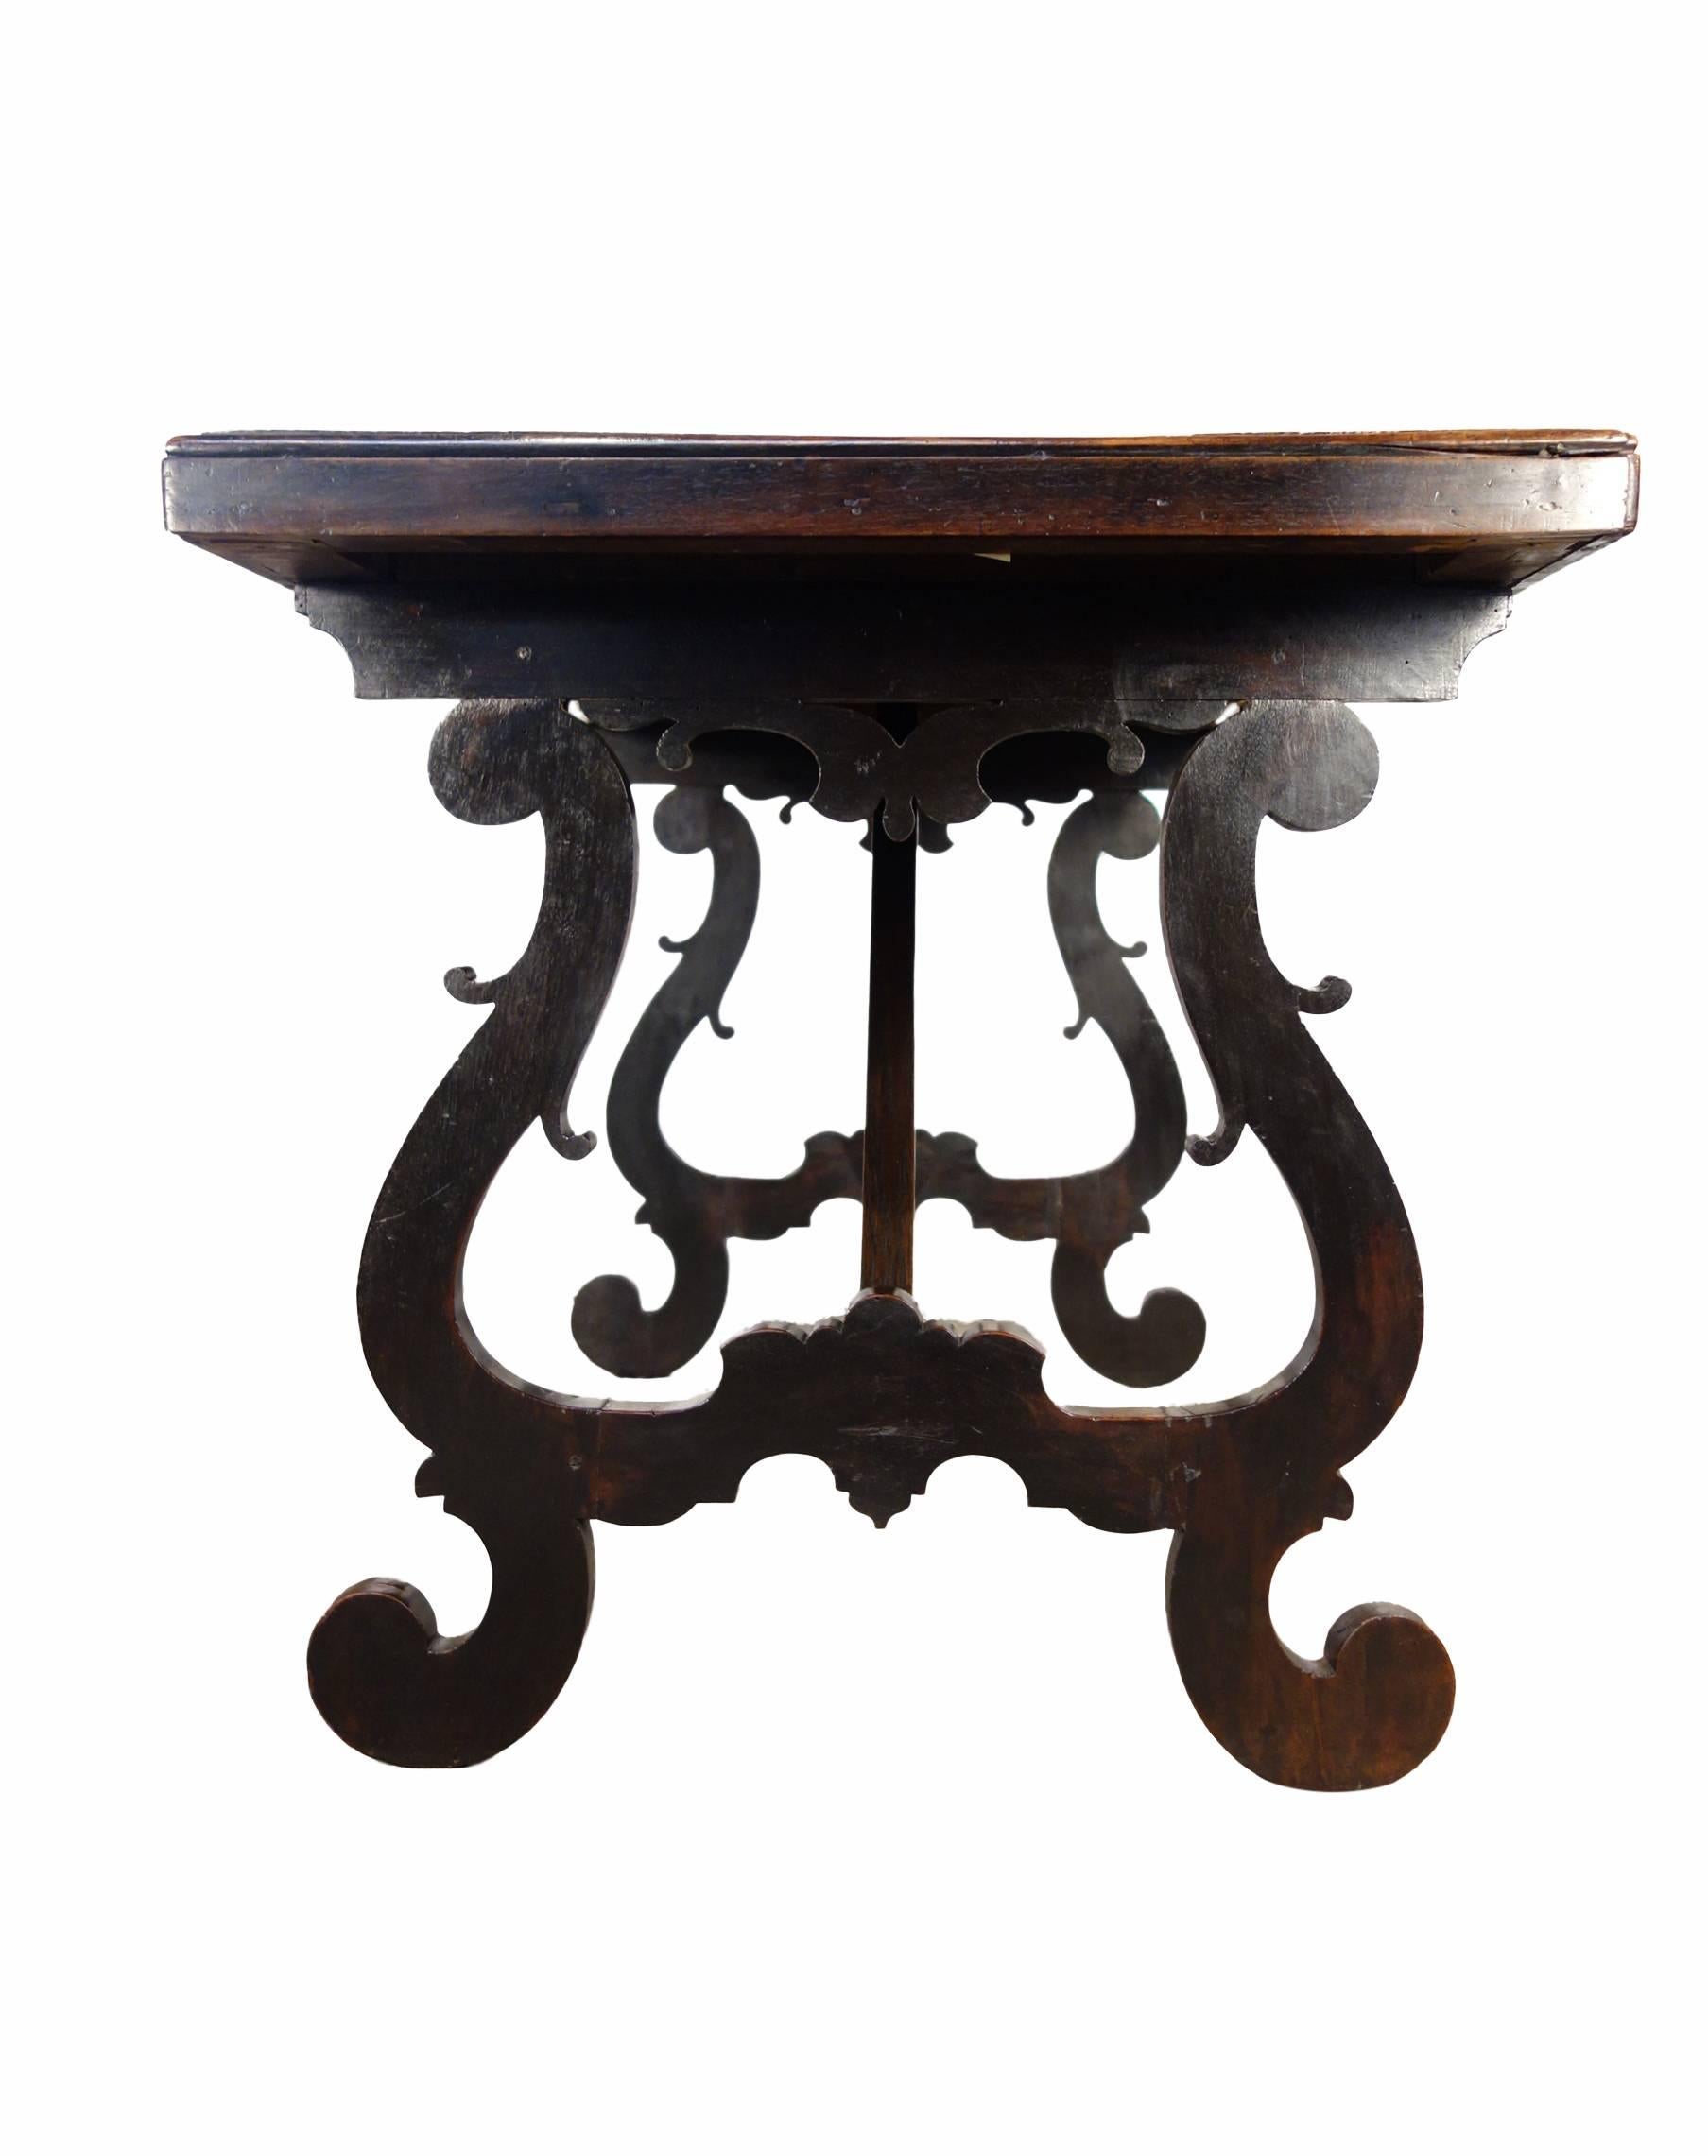 Italian 17th Century Tuscan Refectory Style Walnut Table with Lyre Legs